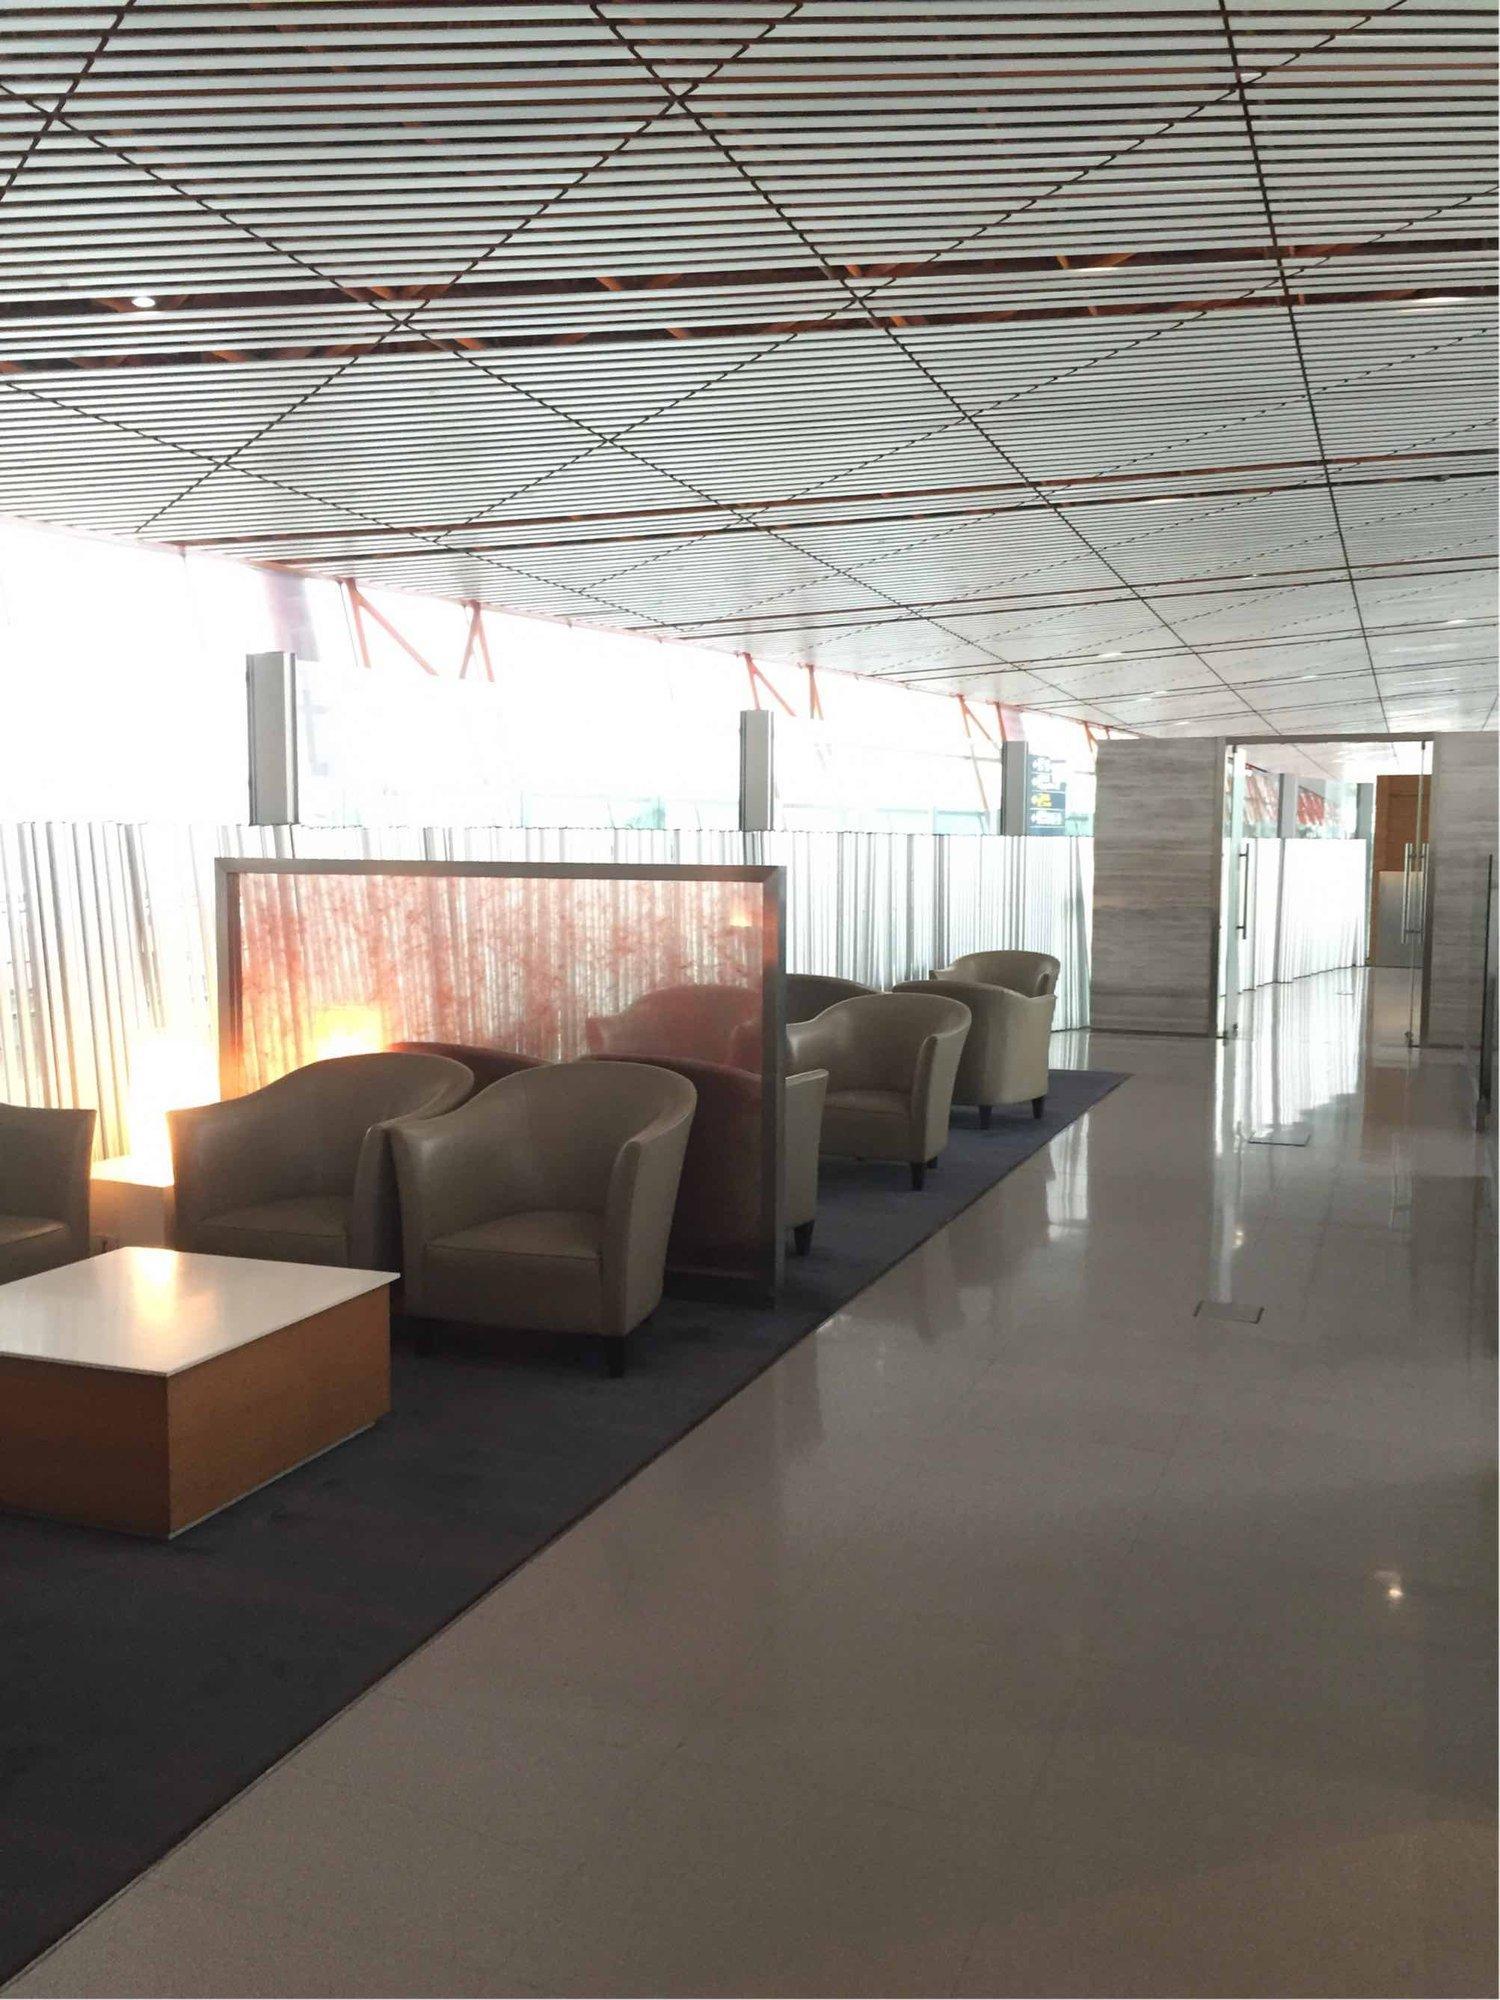 Cathay Pacific Lounge image 9 of 17